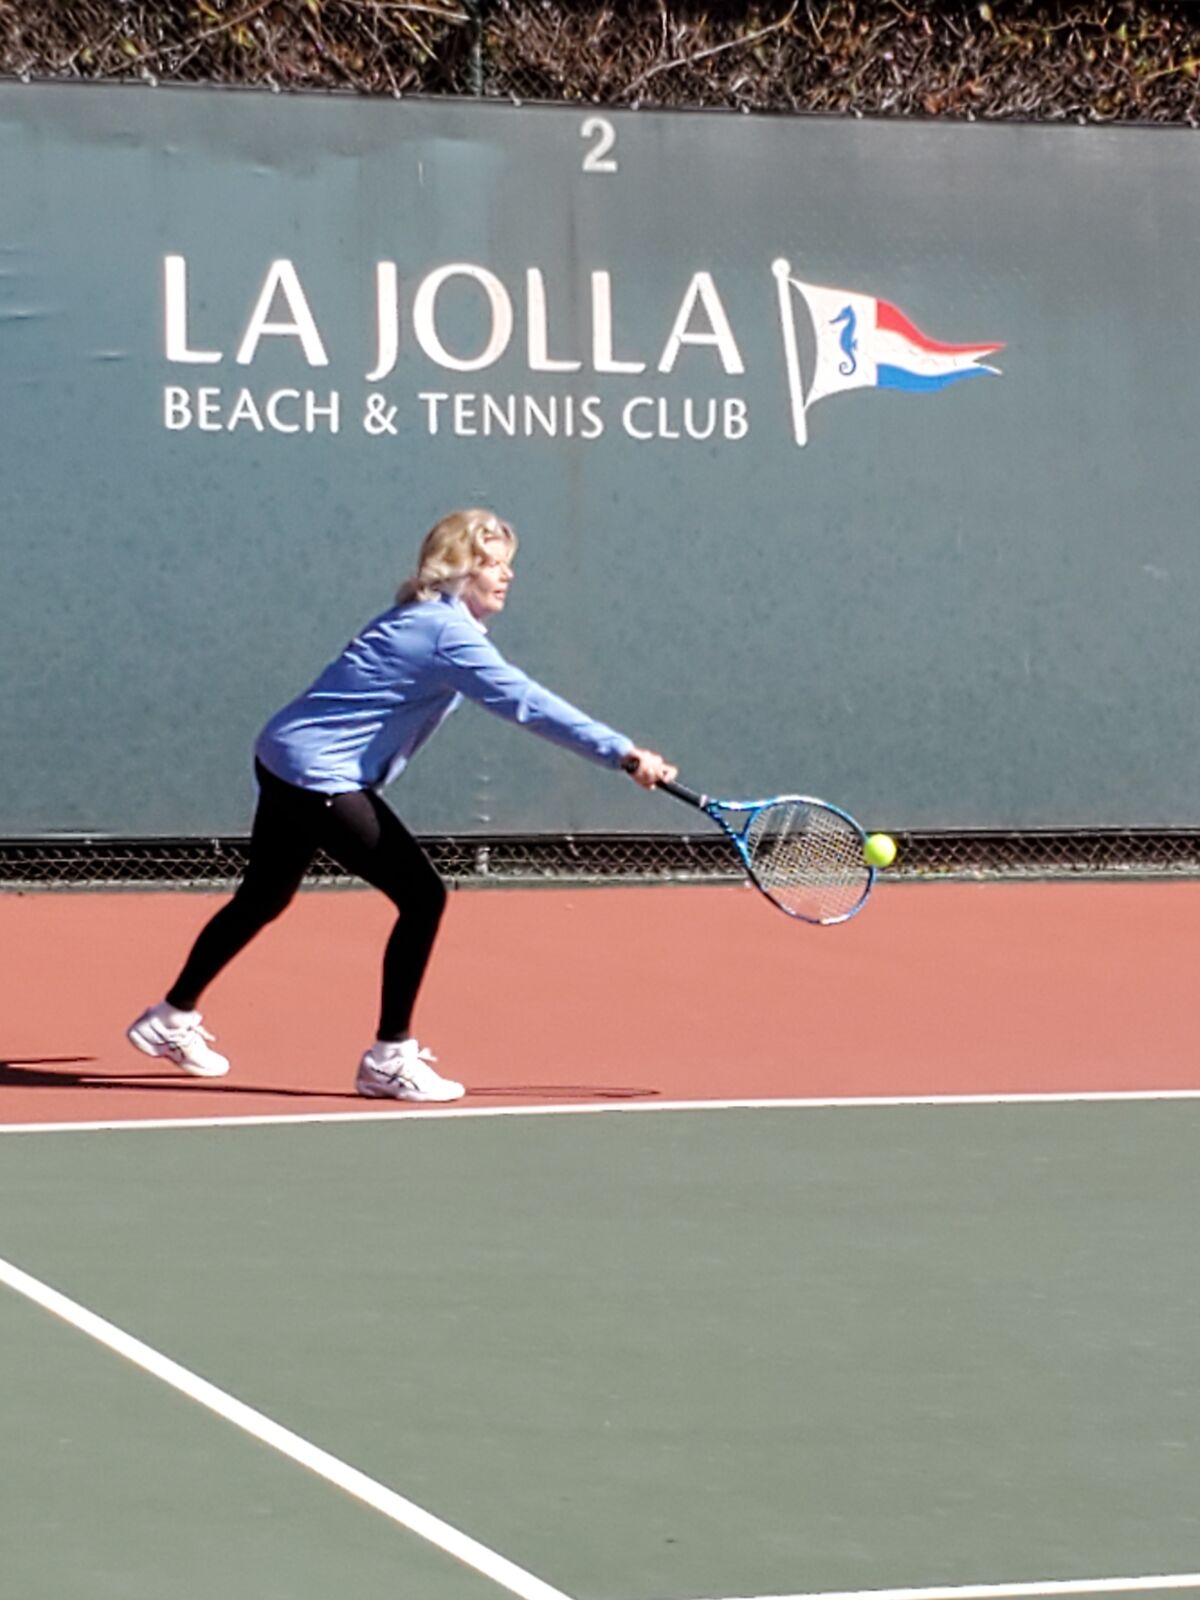 Suella Steel says 'you have to want the ball' to be successful in tennis.